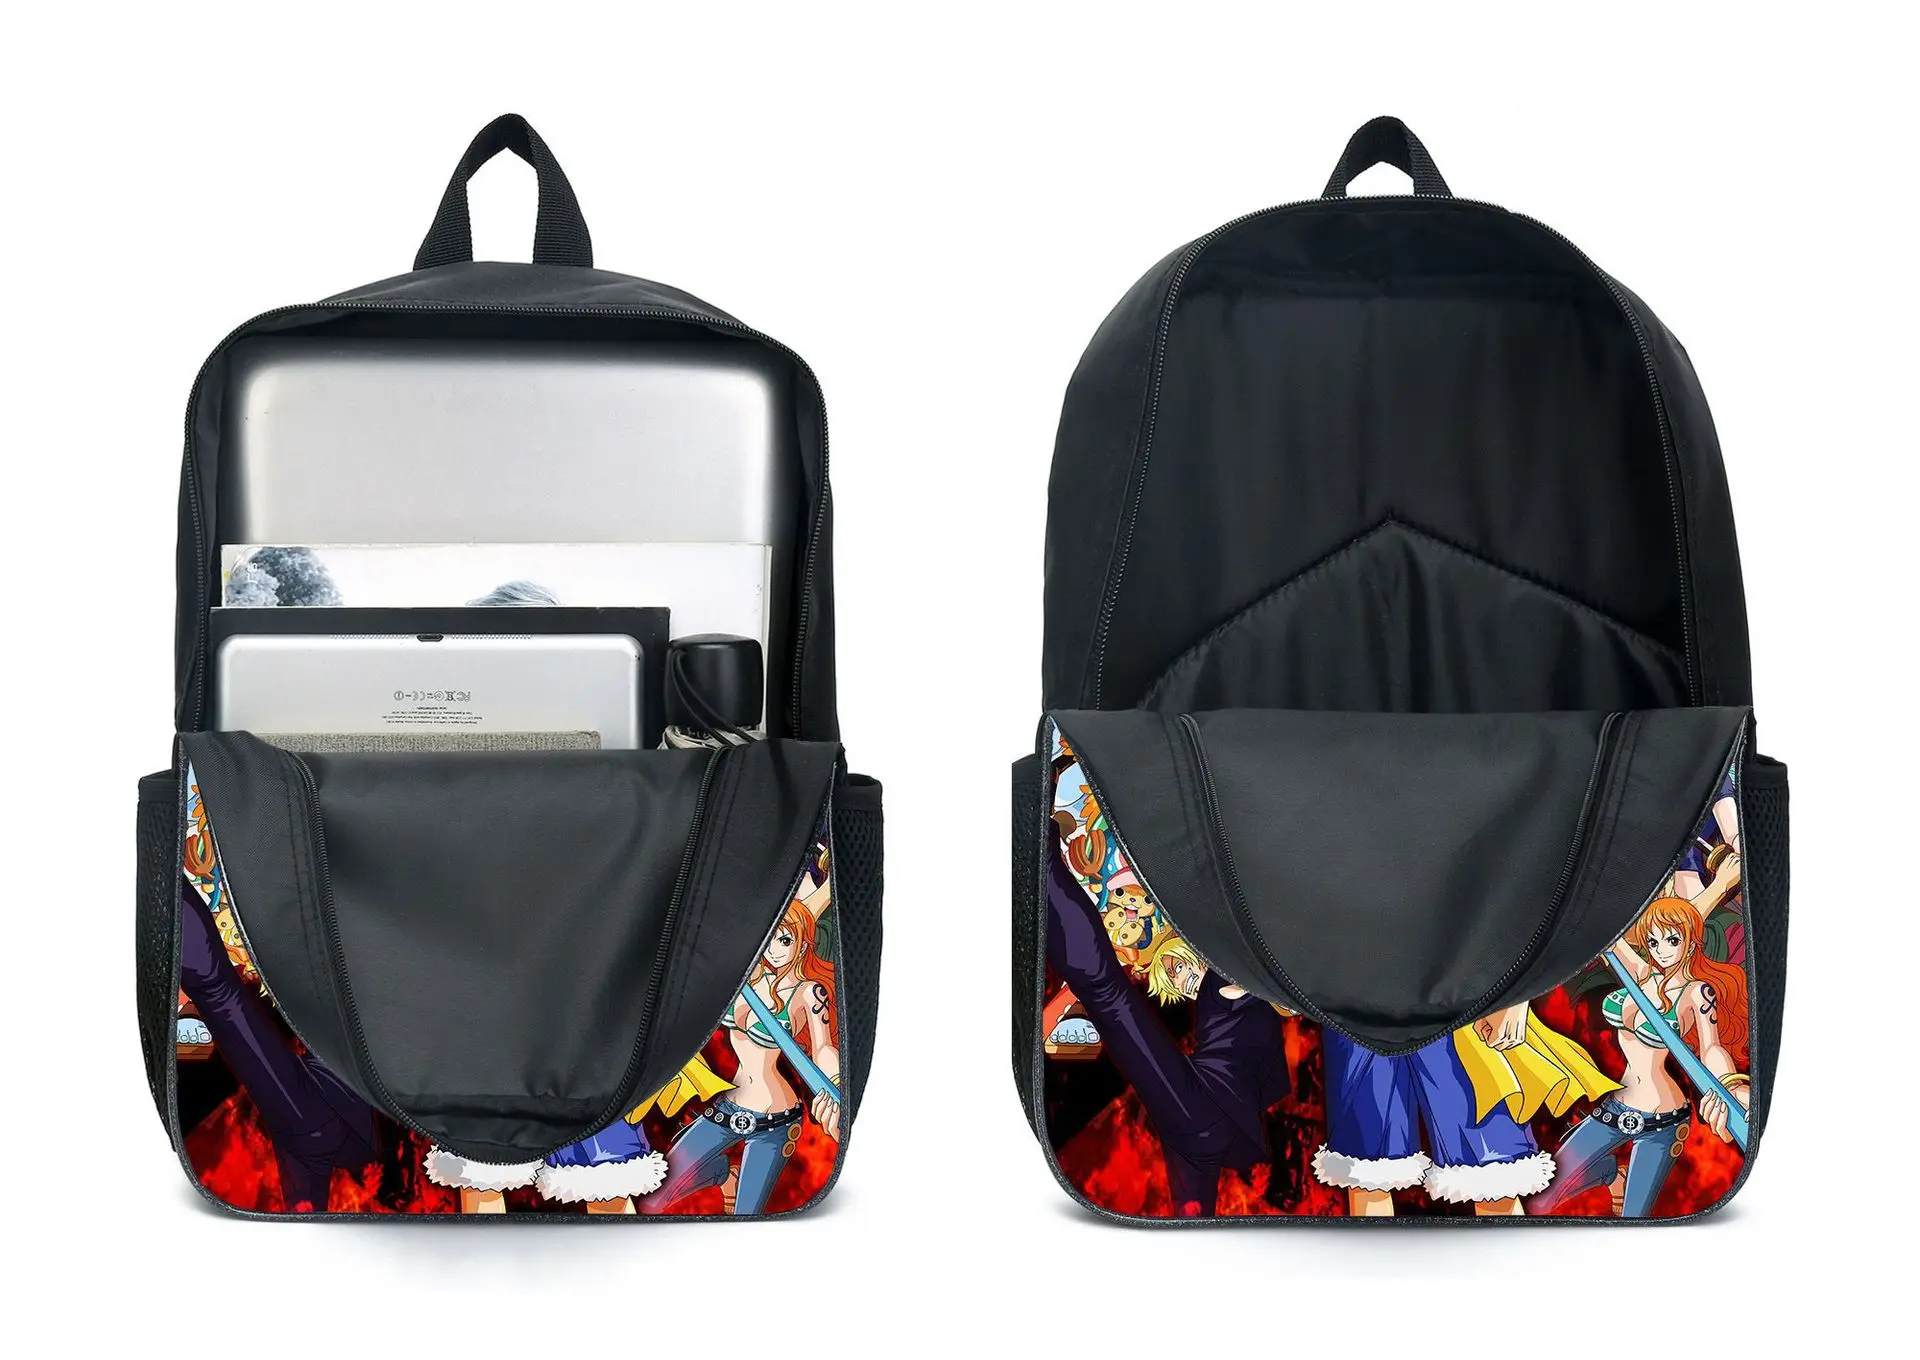 MAKIVI Luffy Anime Backpack Set With Lunch Box And Pencil Case - Perfect  For Fans Of The Iconic Anime Series 01